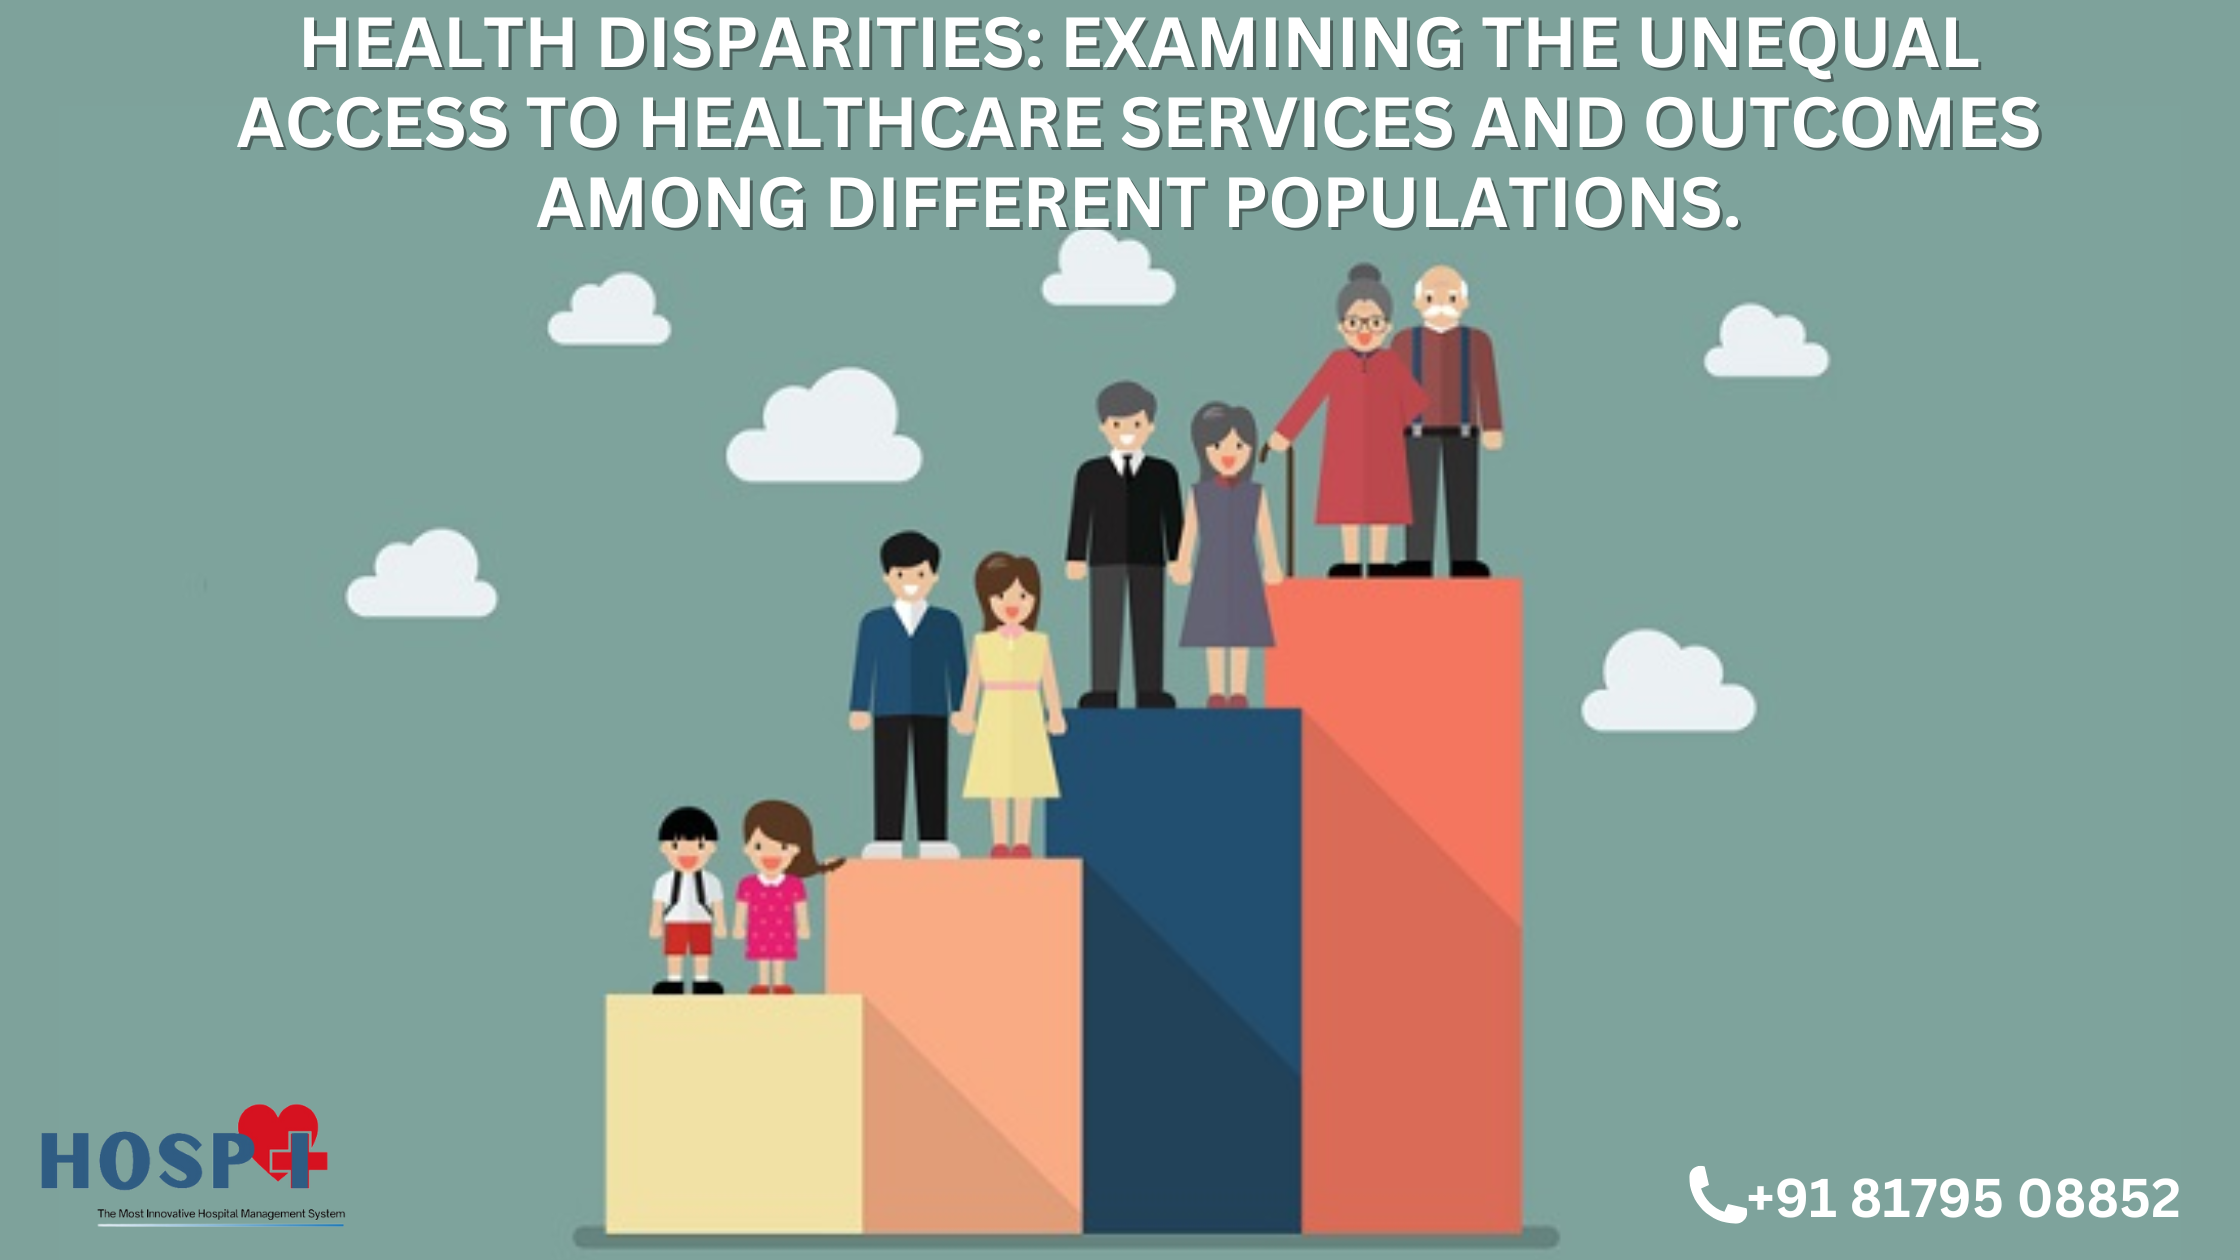 Health Disparities: Examining the unequal access to healthcare services and outcomes among different populations.